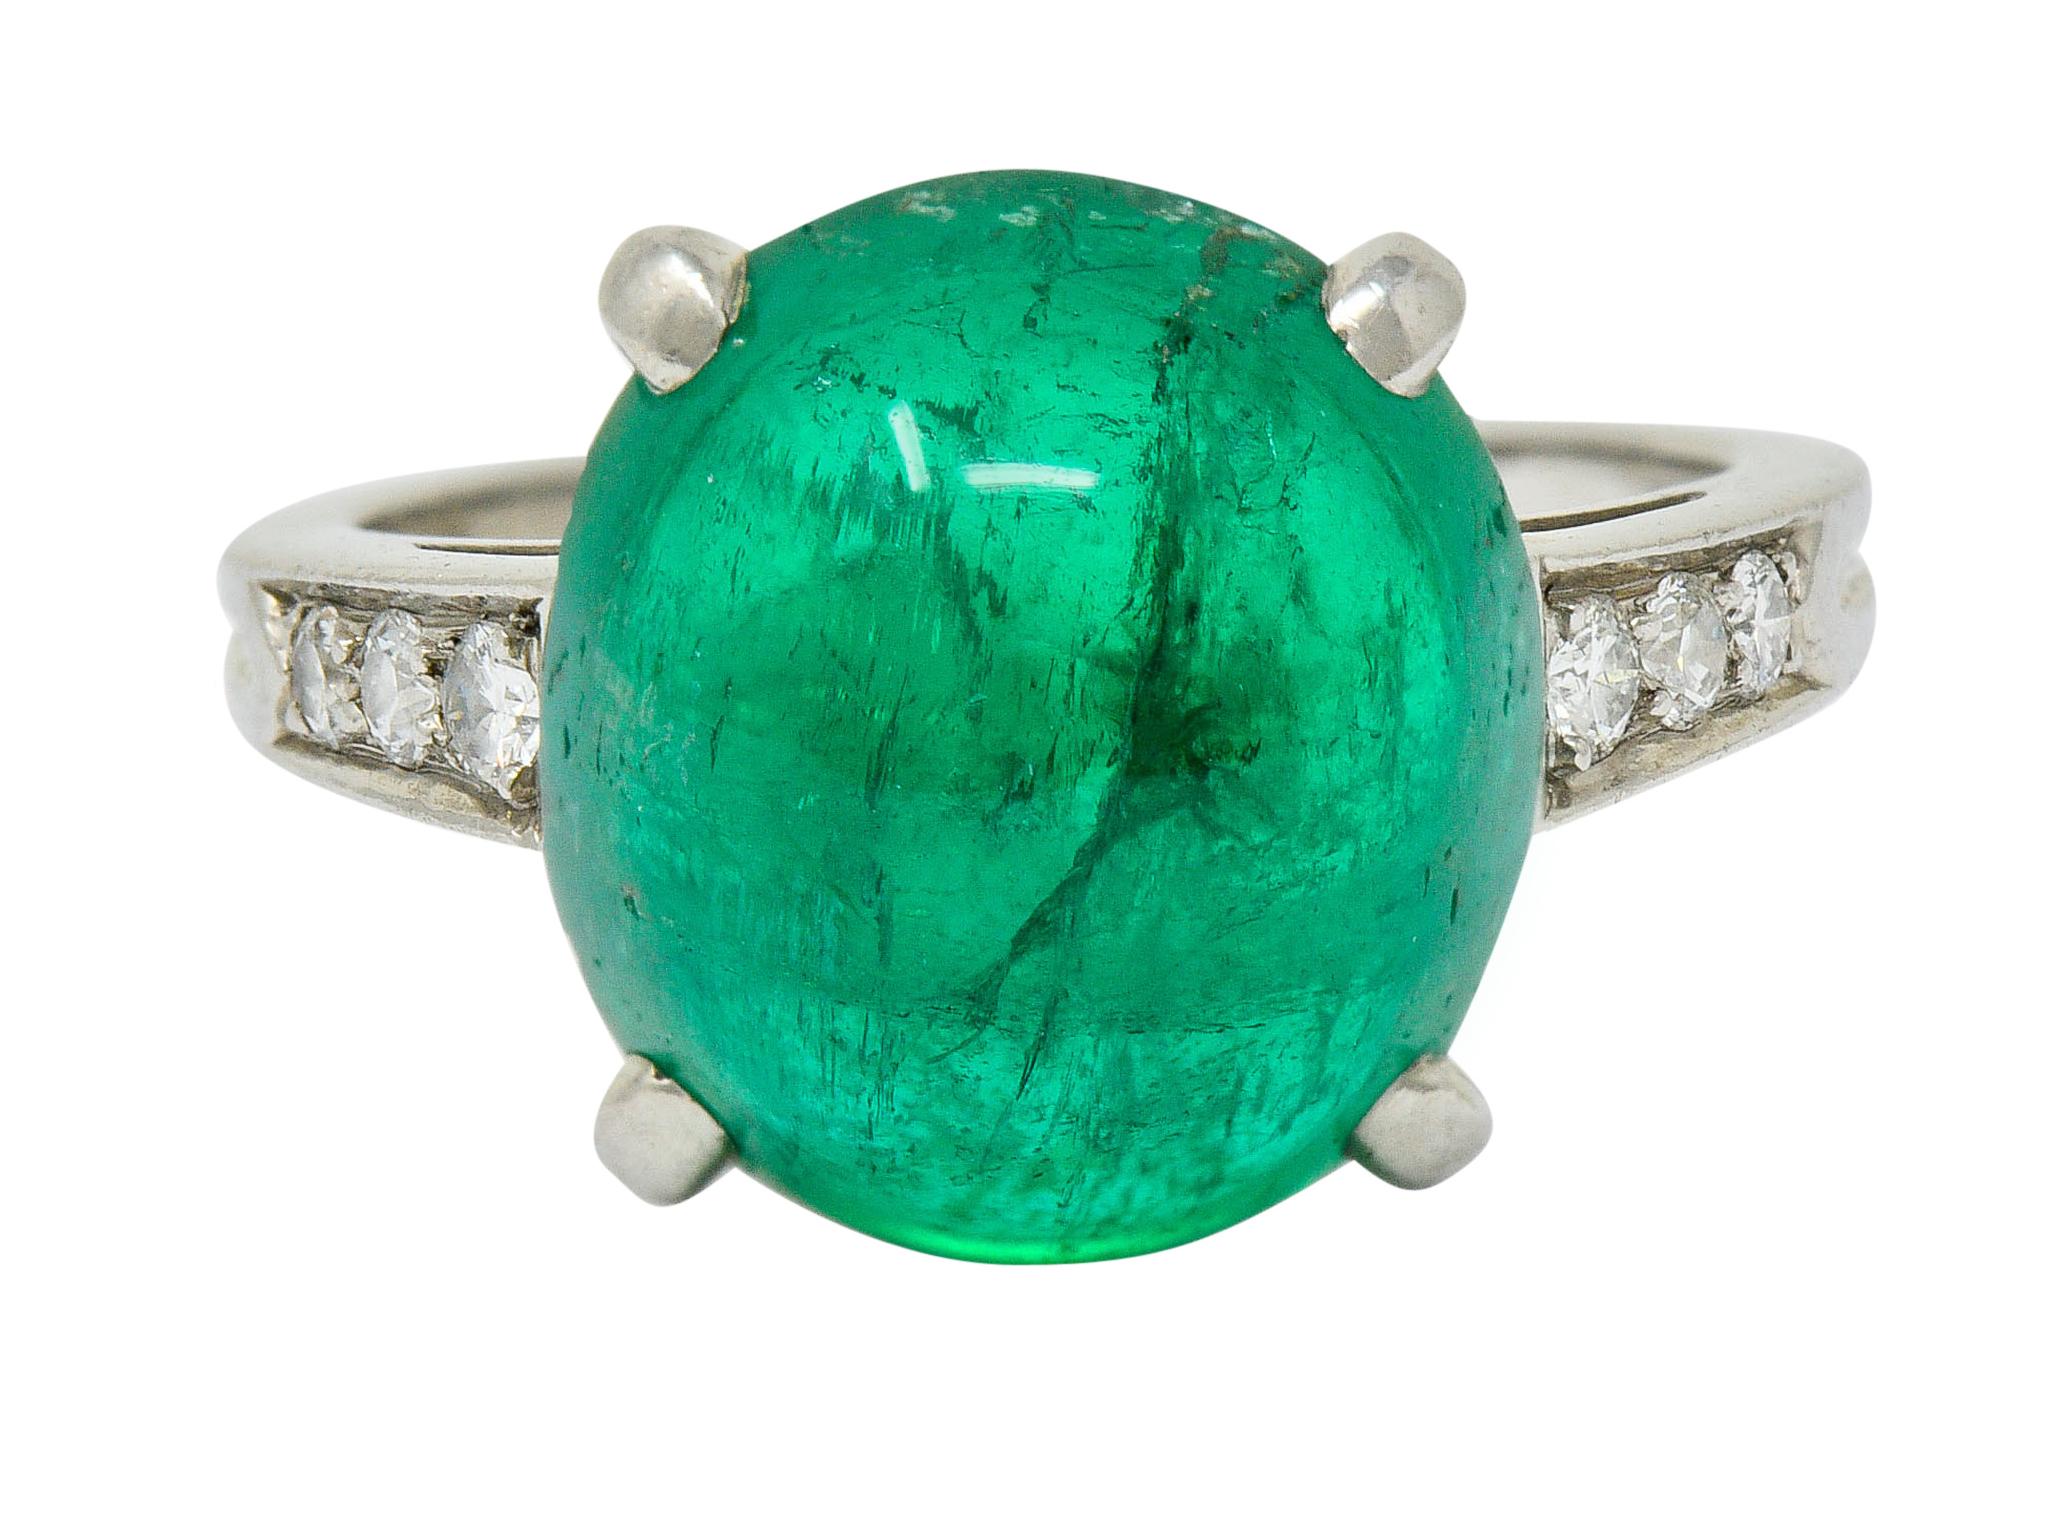 Basket cathedral style ring centering an oval emerald cabochon weighing approximately 7.00 carats

Vividly green in color and translucent with natural inclusions indicating Colombian origin; faint traditional clarity enhancement

Flanked by round